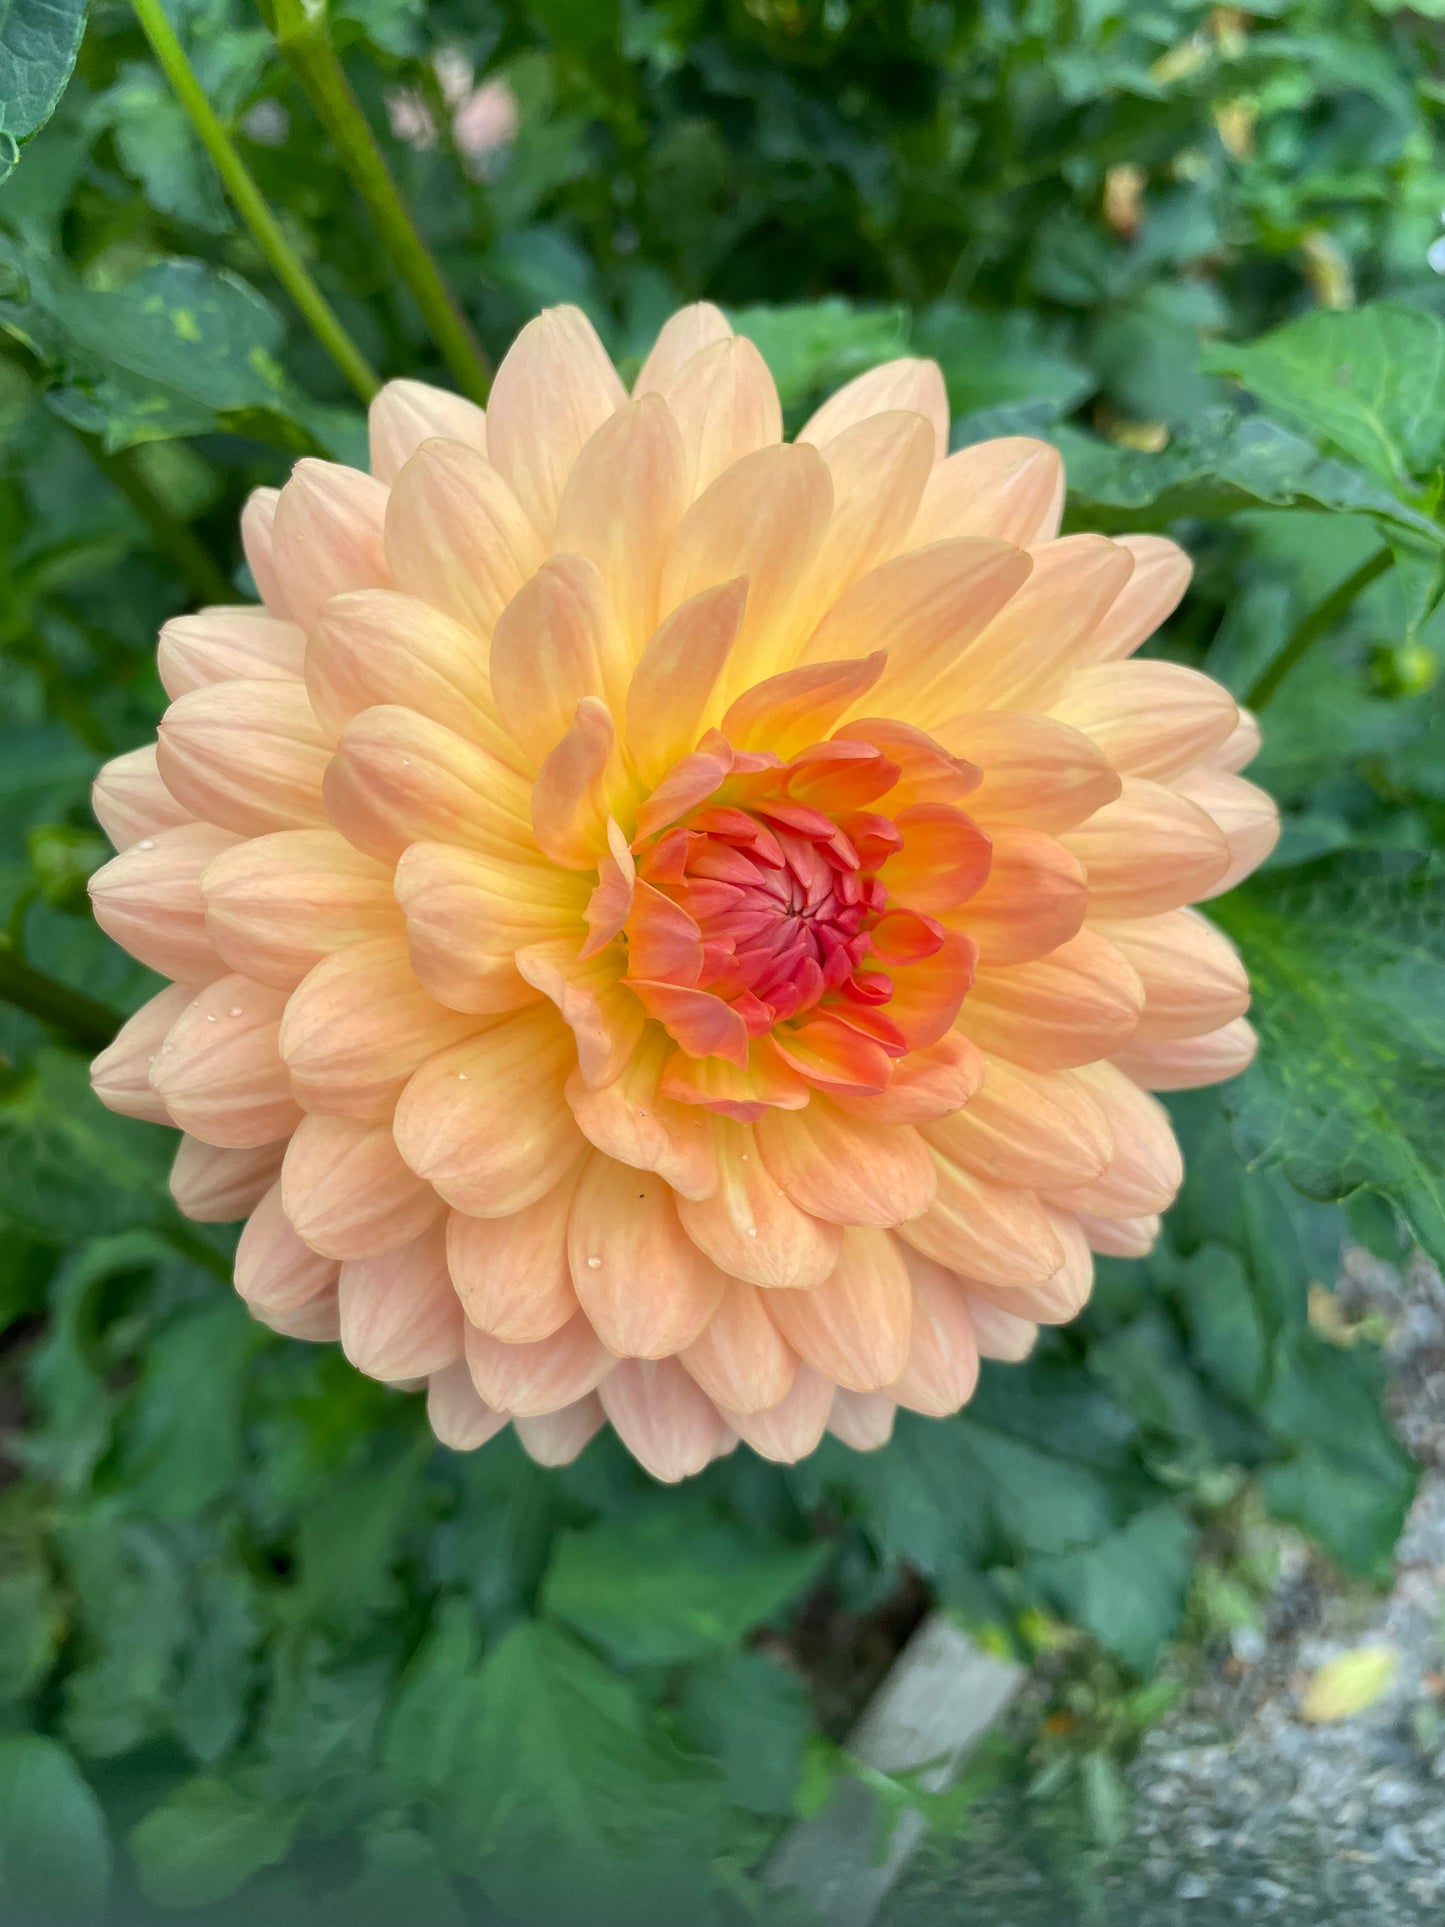 Waterlily dahlia "Gabrielle Marie" opening.  Apricot coral pink.  Fully double petals.